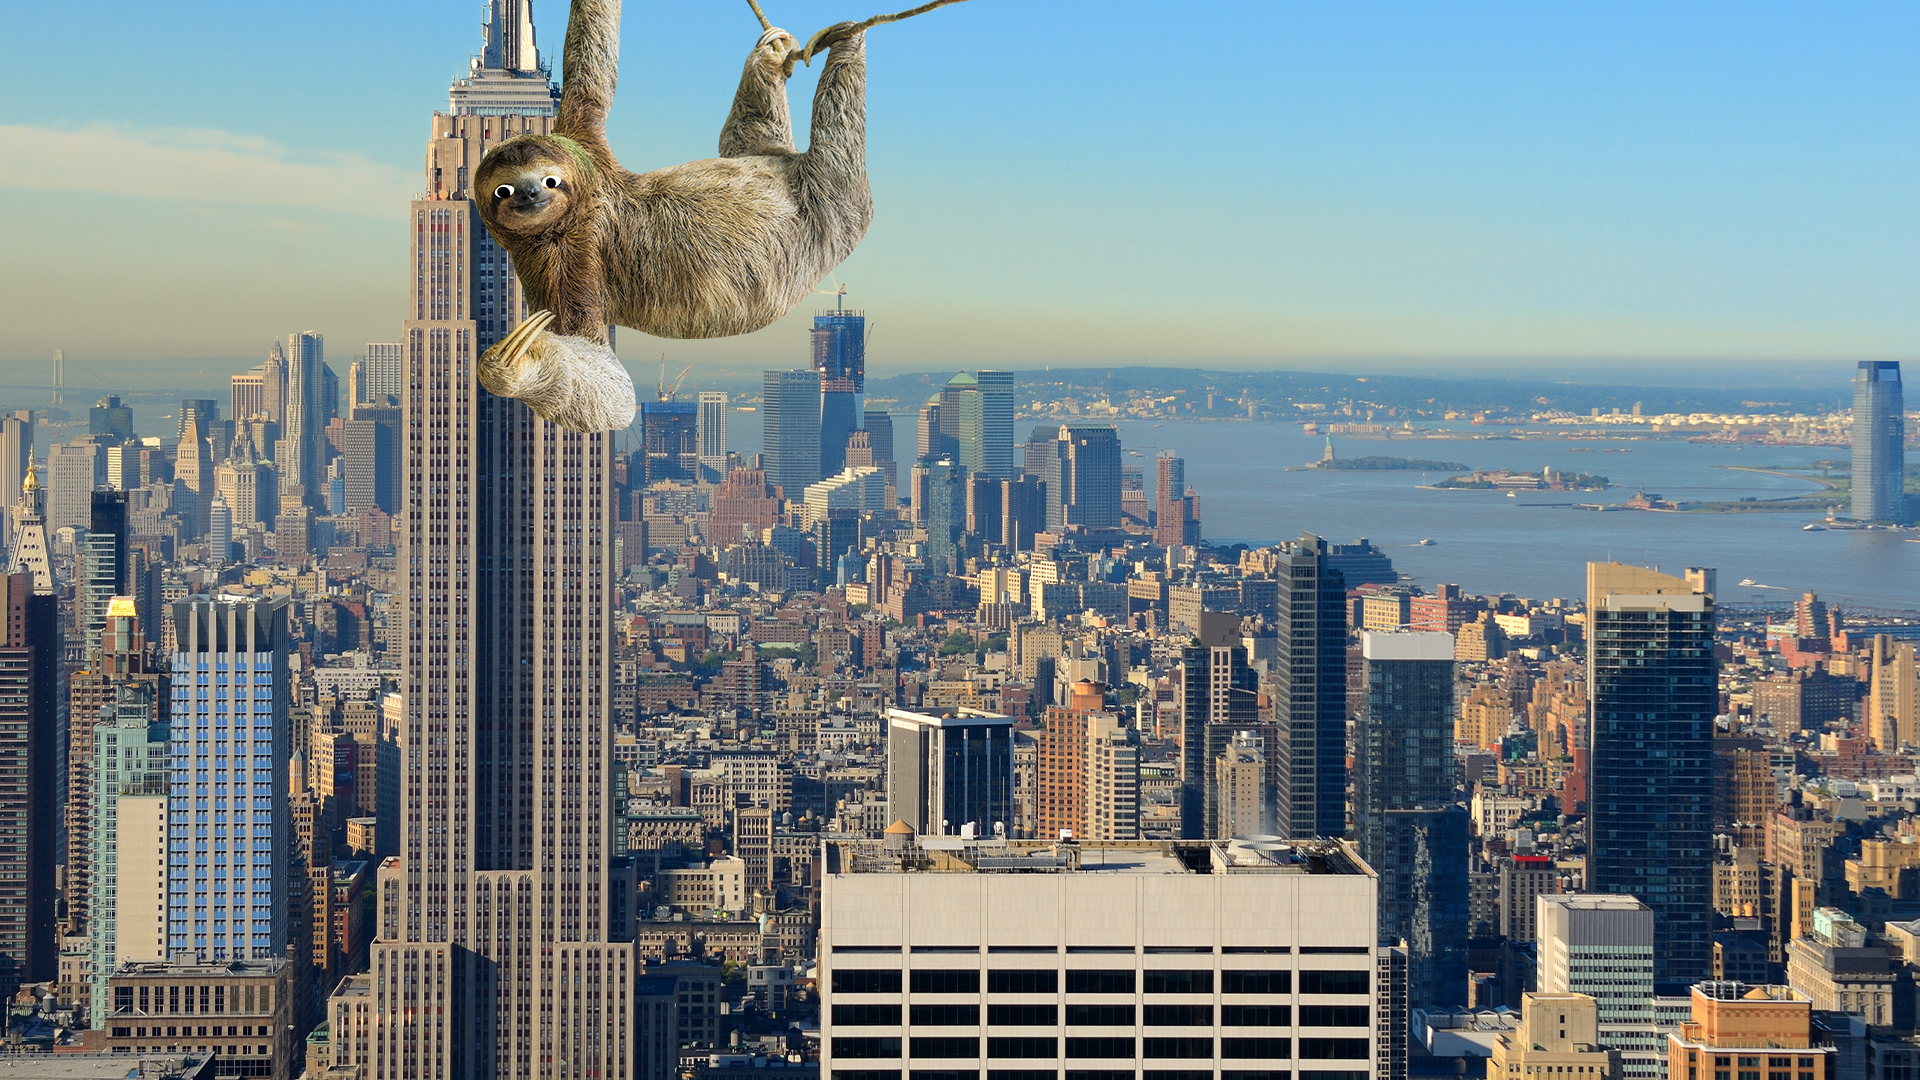 Beano sloth enjoying the view from the Empire State building